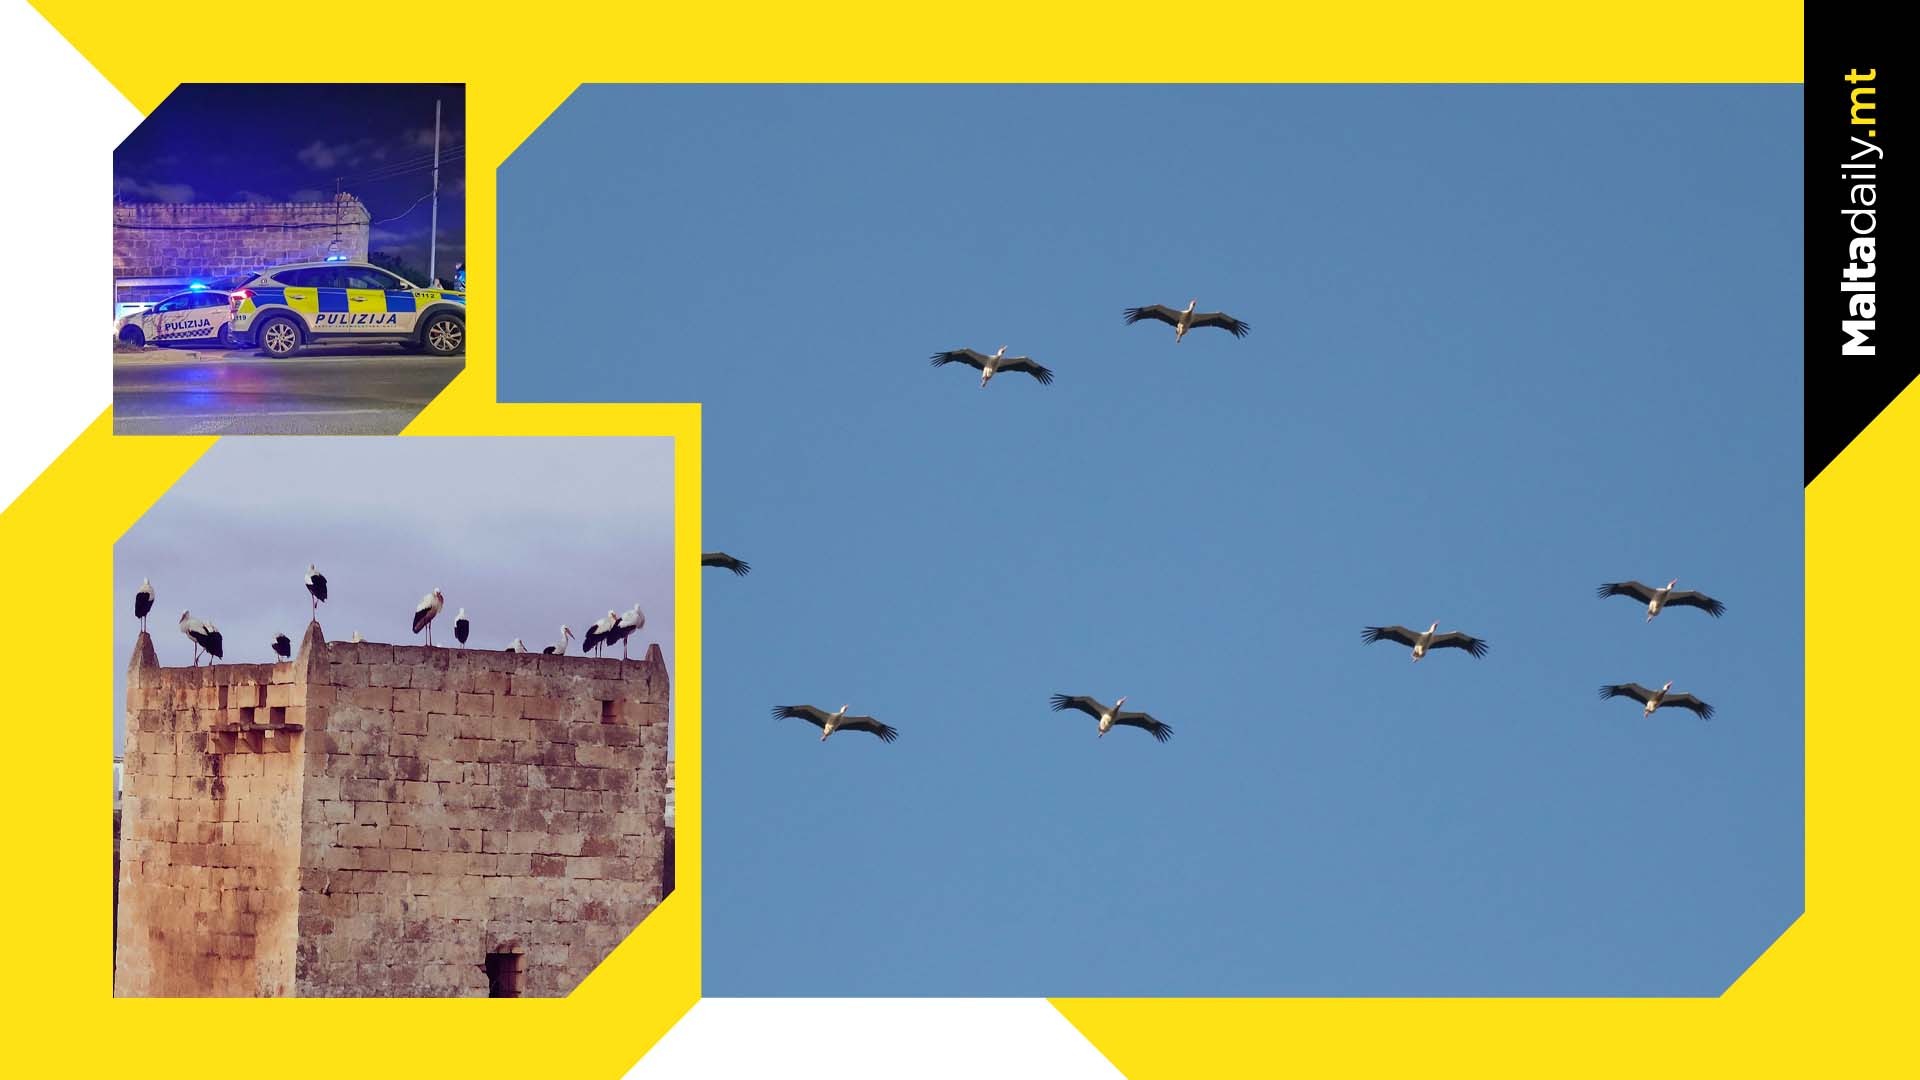 White Storks roosting in Malta safely guarded by police & BirdLife